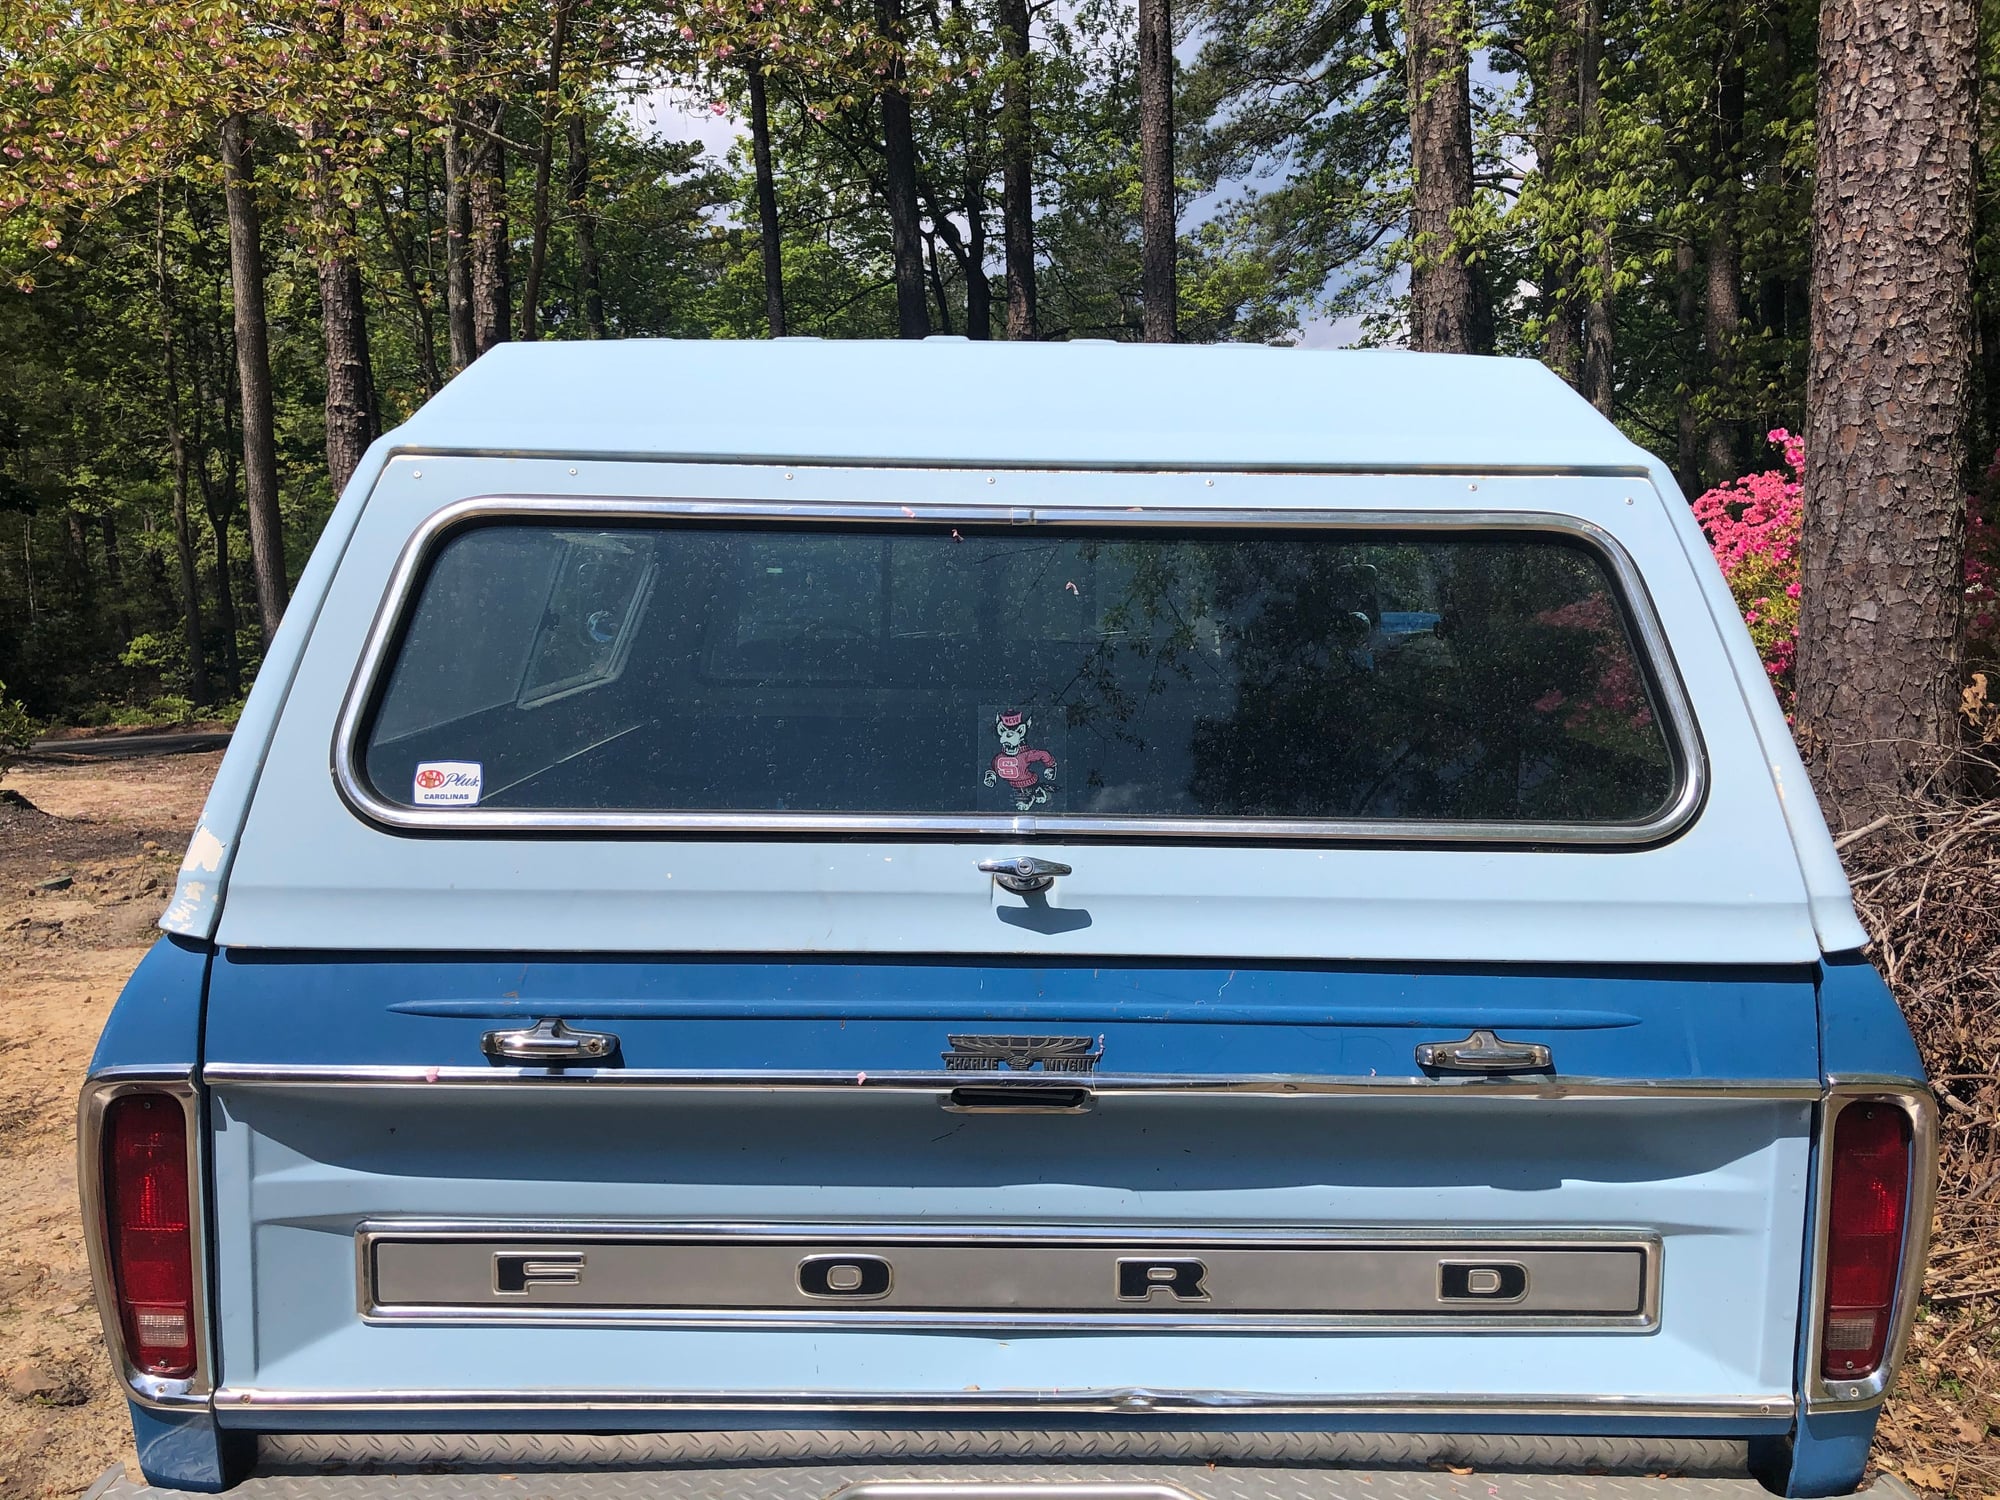 Exterior Body Parts - OEM 1978 Ford F150 Camper Shell for Long Bed - Used - 1976 to 1979 Ford 1/2 Ton Pickup - Virginia Beach, VA 23452, United States